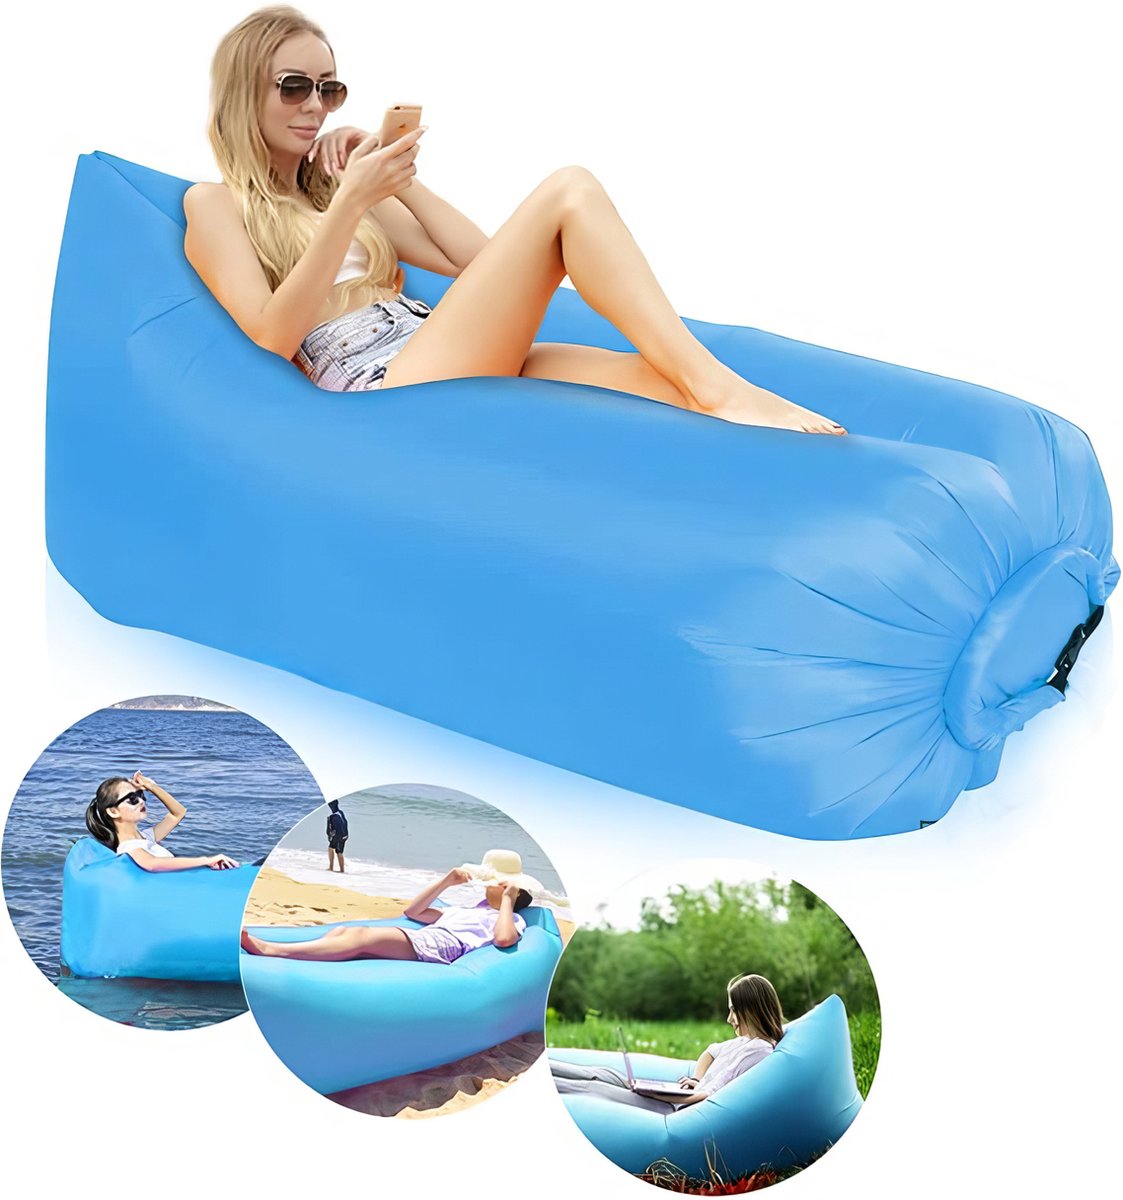 Air Lounger - Lucht Lounger -Zitzak - Sofa Matras -Luchtbed - Zwembad - Strand - Luchtbed Airlounger - Water - Camping- Lichtblauw